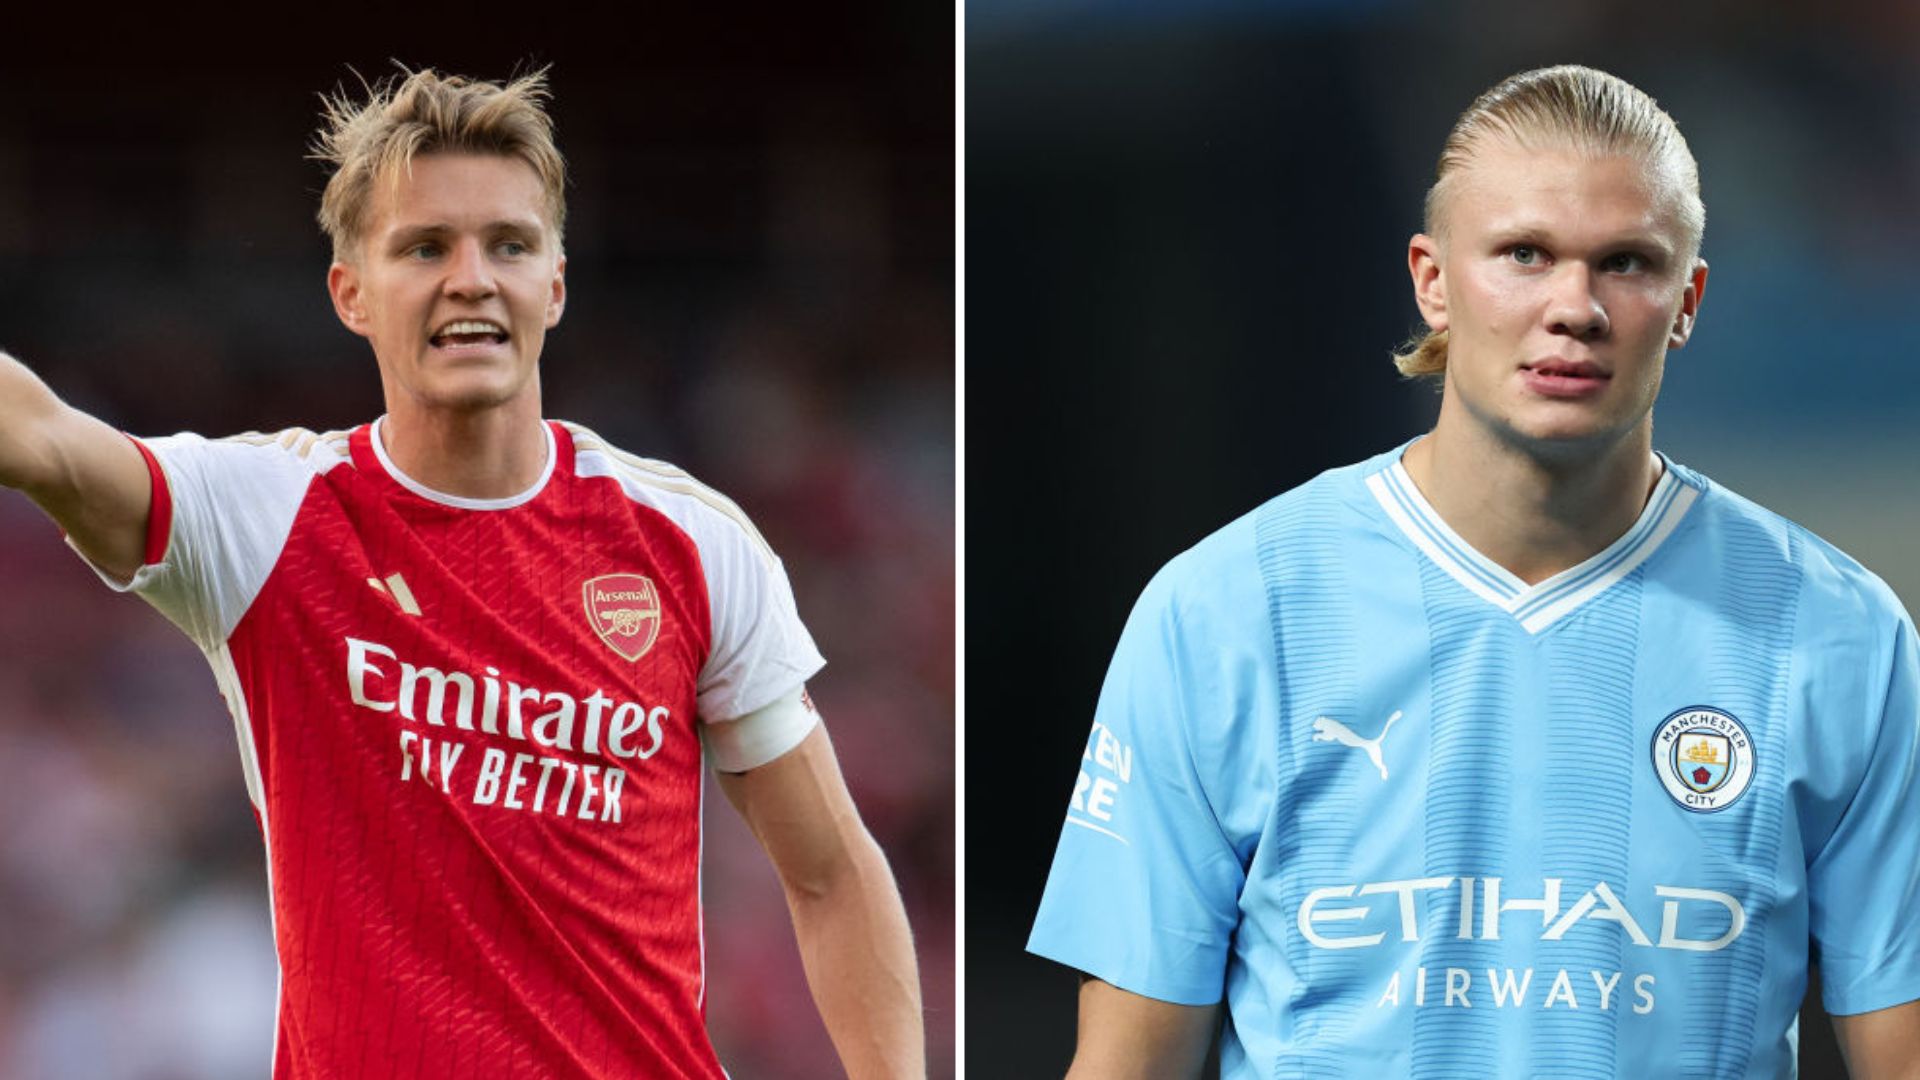 Arsenal vs Manchester City live stream, match preview and kick-off time for the Community Shield